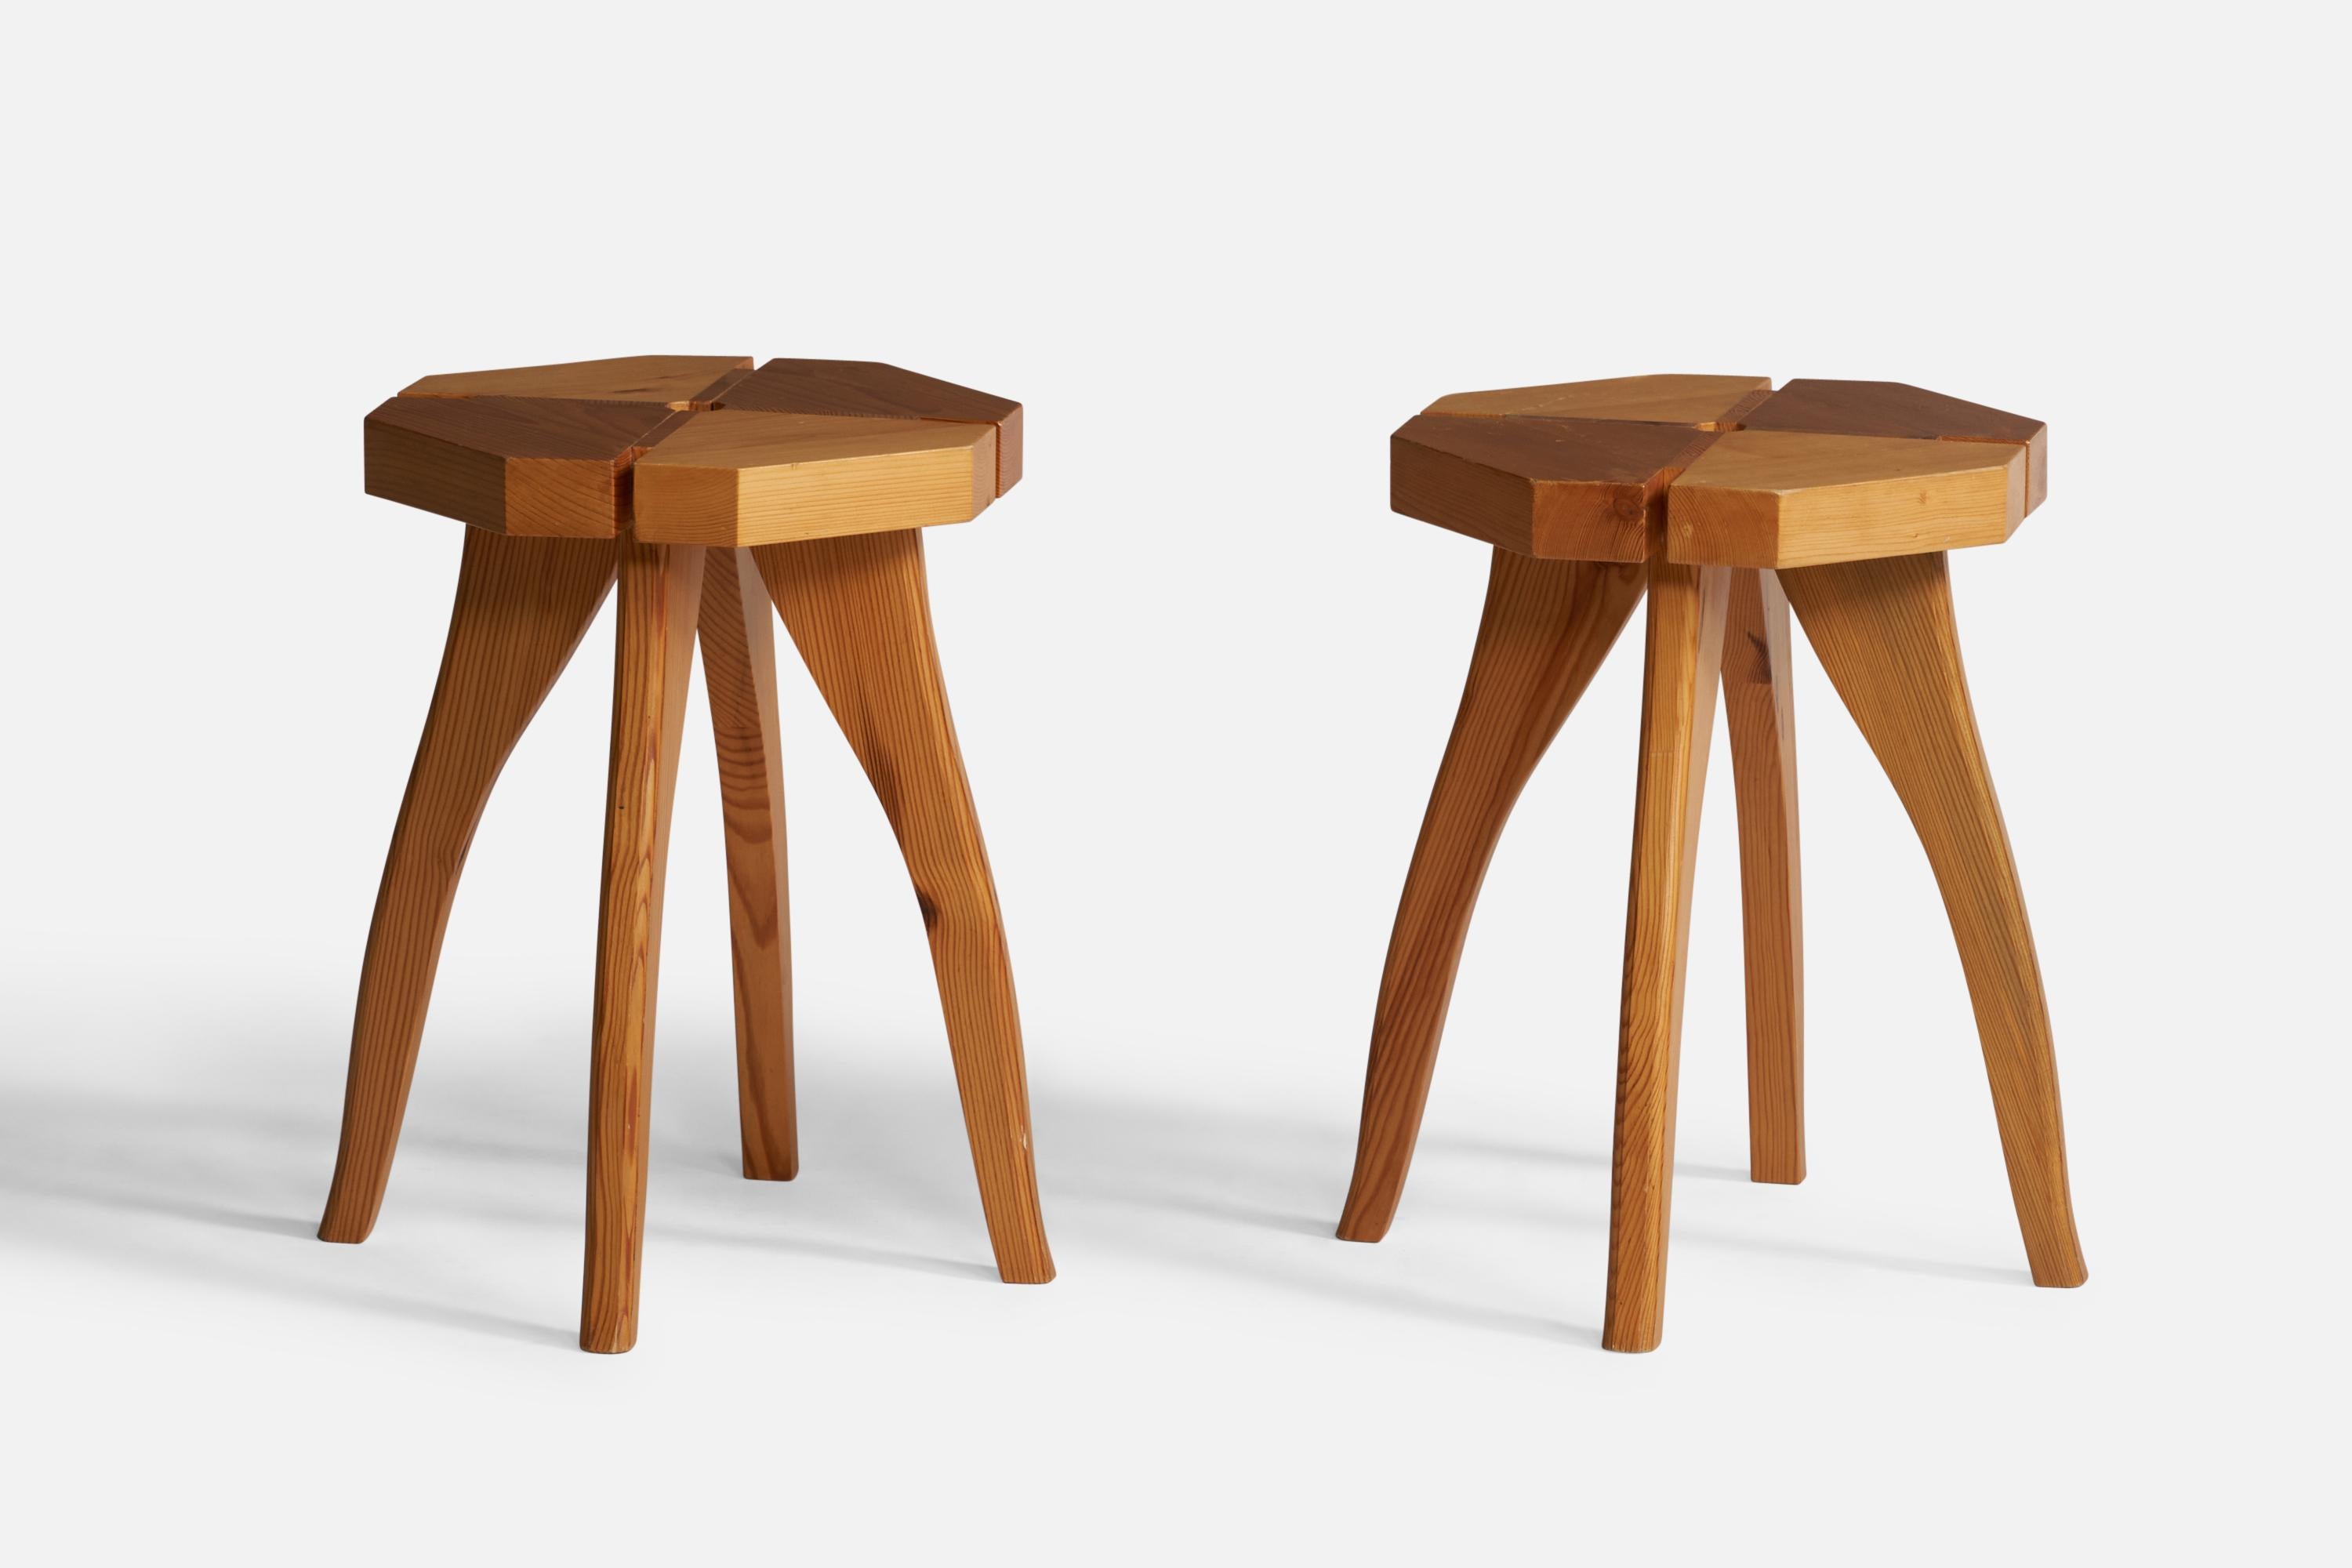 A pair of pine stools designed and produced in Sweden, c. 1970s.

Seat height: 17”
seat width and depth: 12”